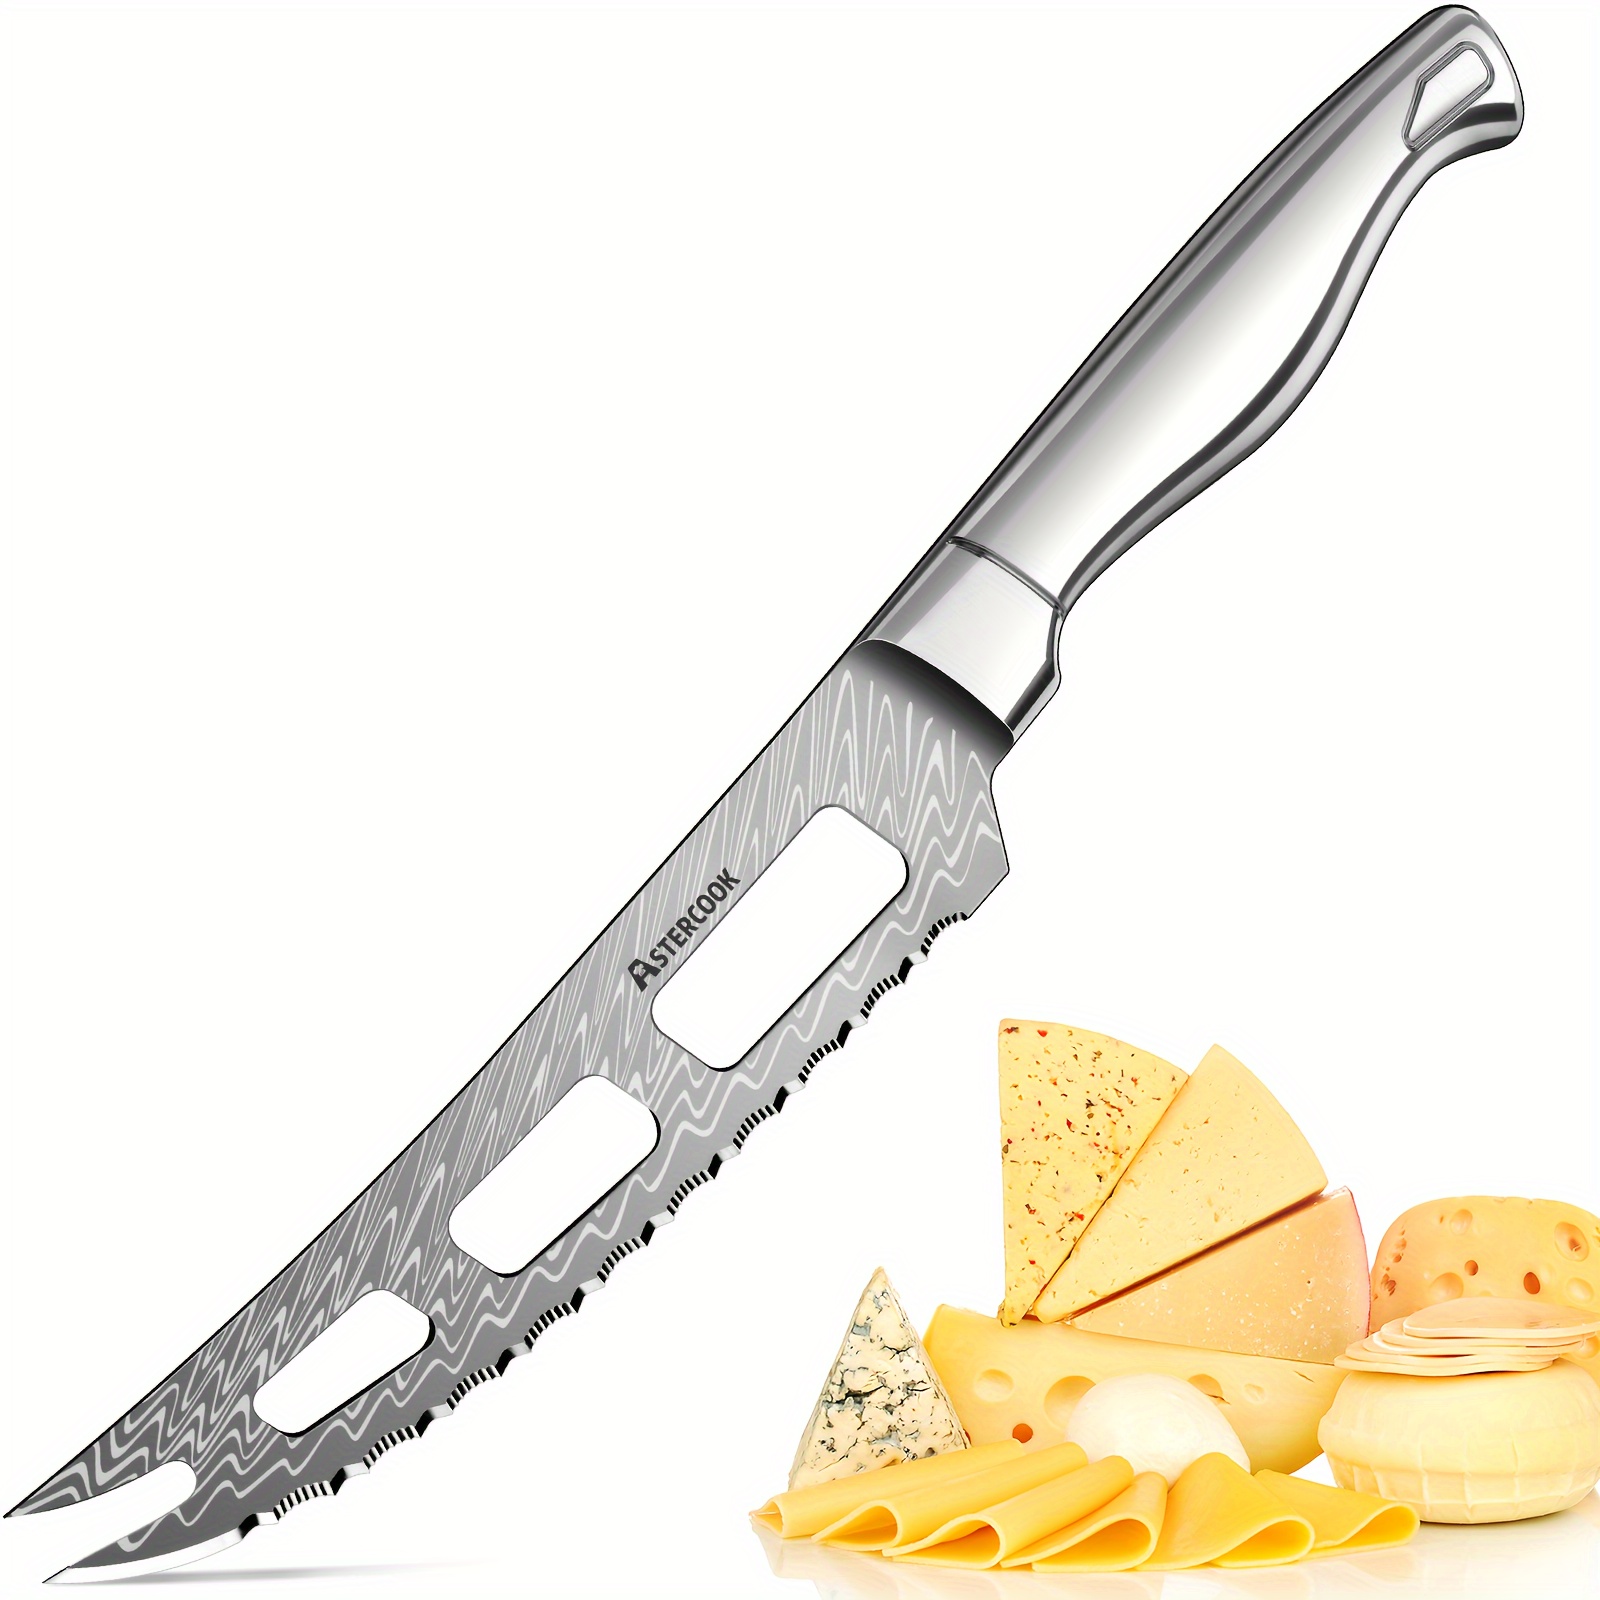 

1pc/astercook Cheese Knife, 5" Kitchen Cheese Knife, German Stainless Steel, Ergonomic Stainless Steel Handle, Dishwasher Safe, Silver, Kitchen Gadgets Gifts For Mom Or Dad